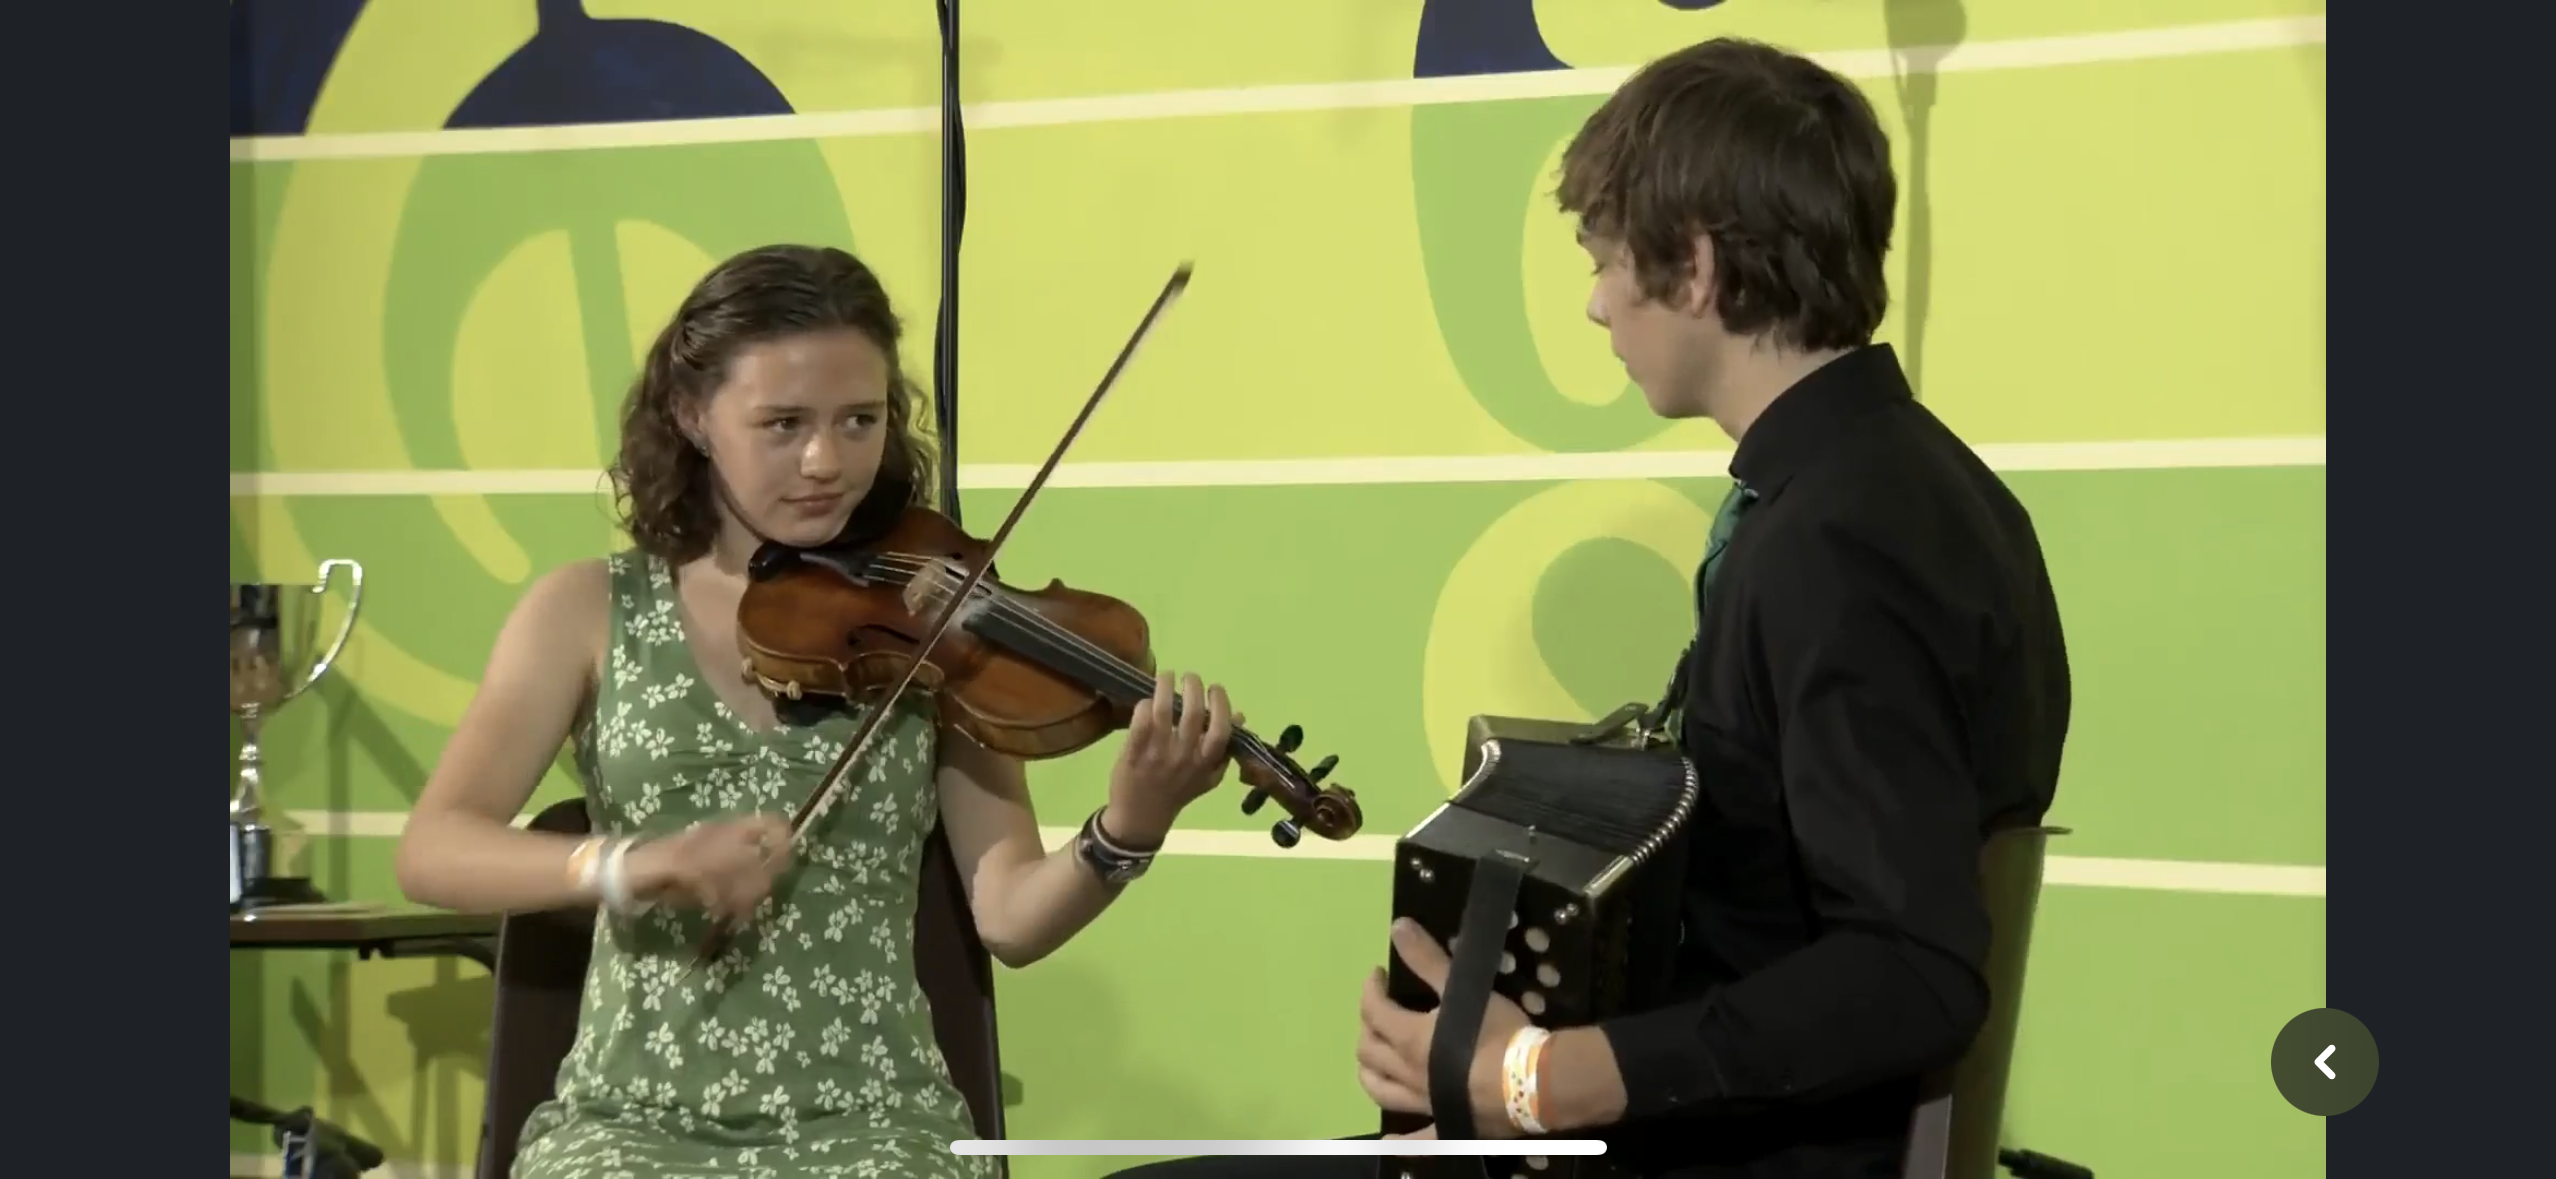 Beth and Teddy's duet competition was broadcast live. (Below) Collin's banjo competition.